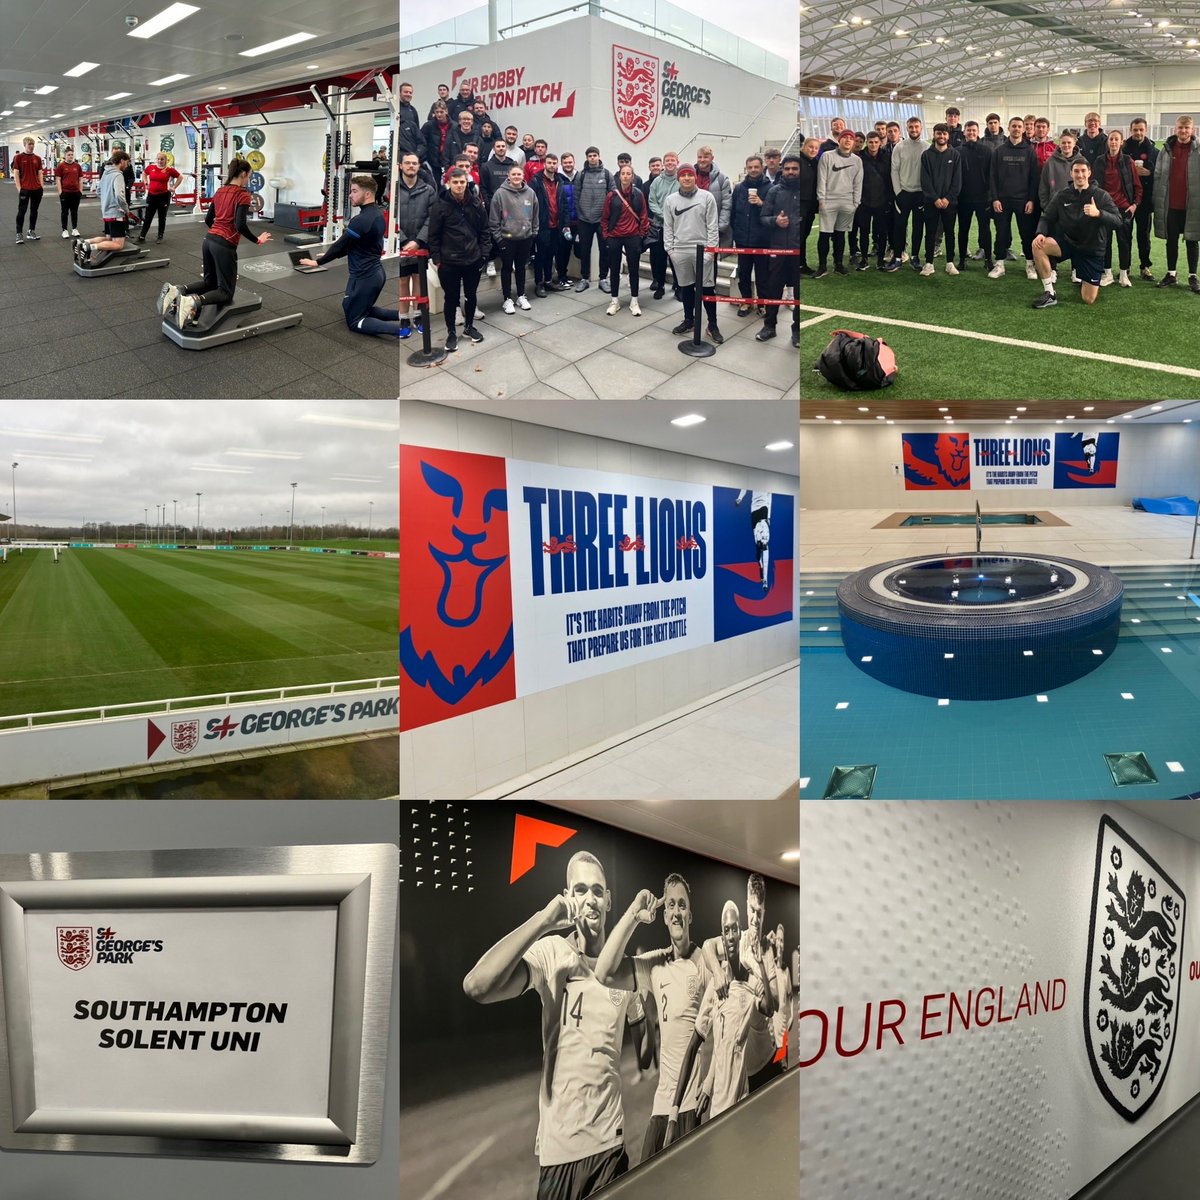 ⁦@Football_BSc⁩ students from ⁦@SolentUni⁩ accessing a unique football experience today. Staff and students learning from the game at the English home of the game. #studentvoice #Studentexperience #TeachingandLearning